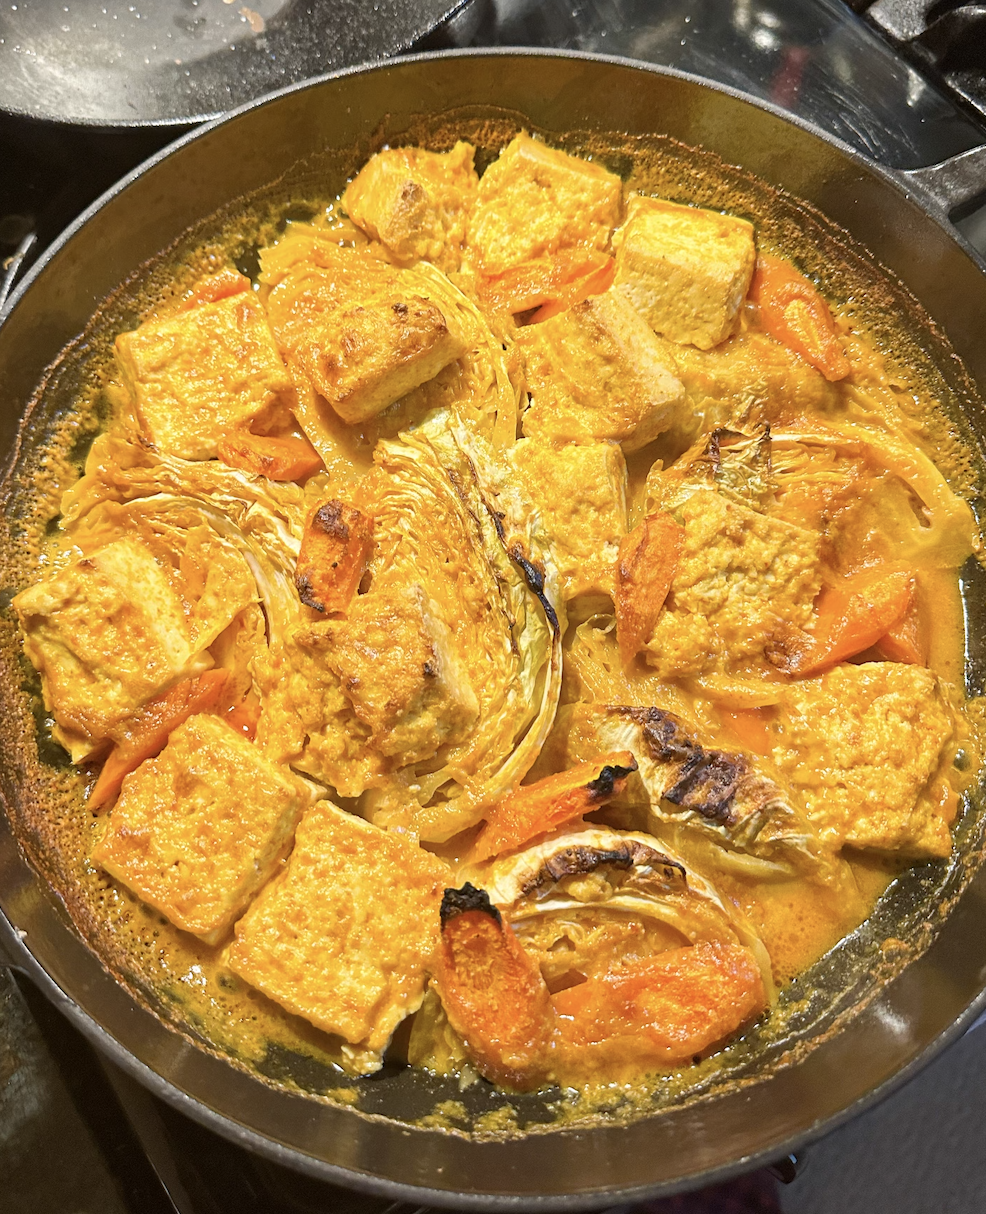 Cabbage tofu and carrots in a curry sauce after baking